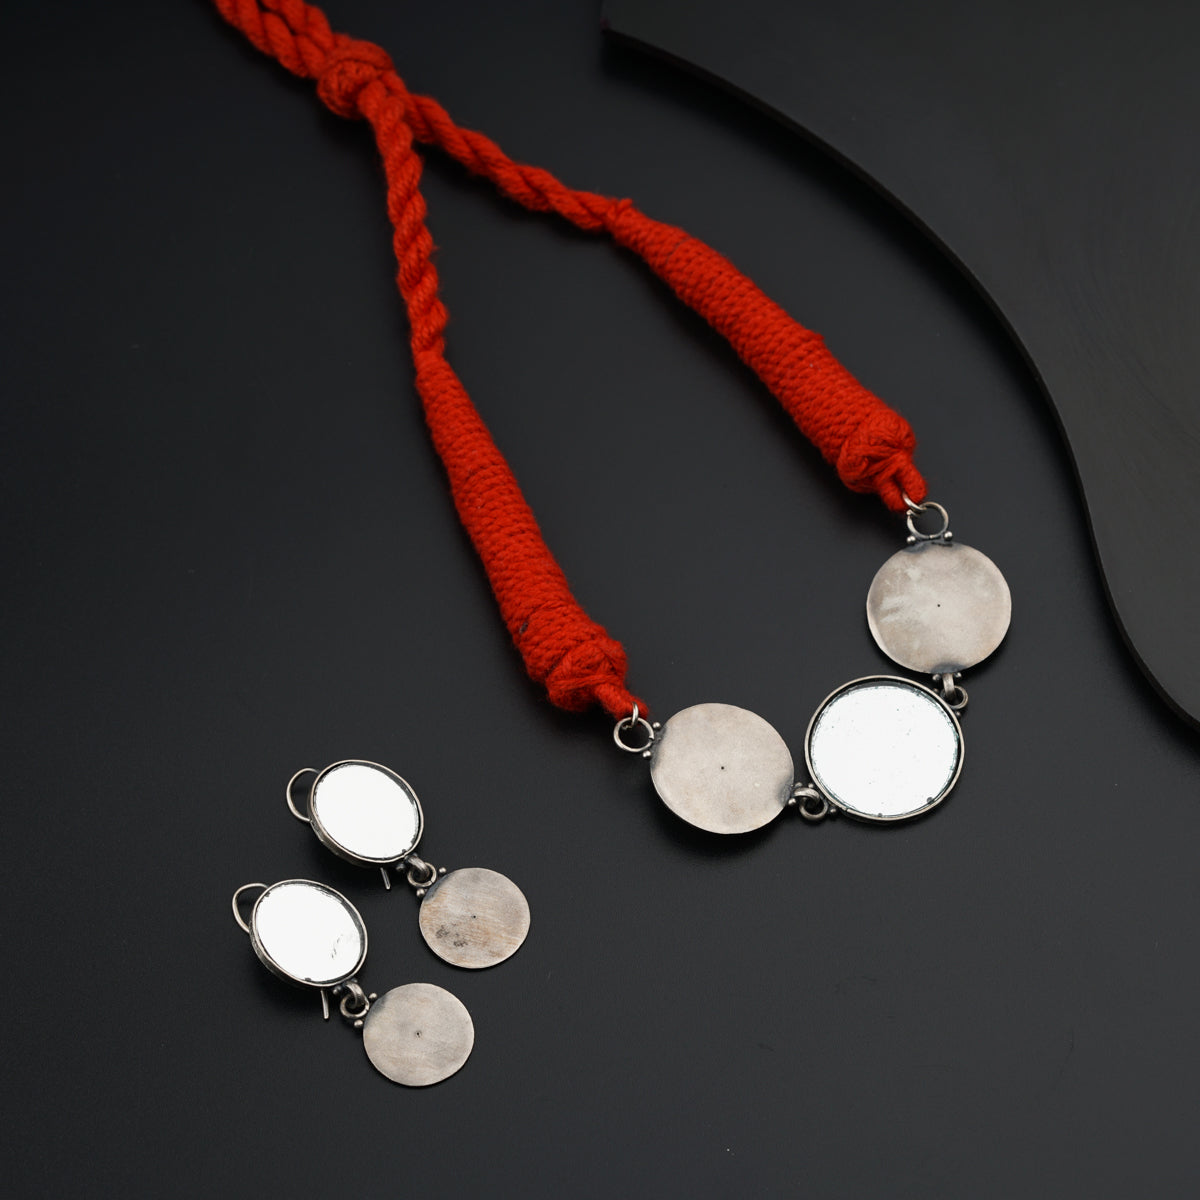 a pair of silver and red necklaces on a black surface